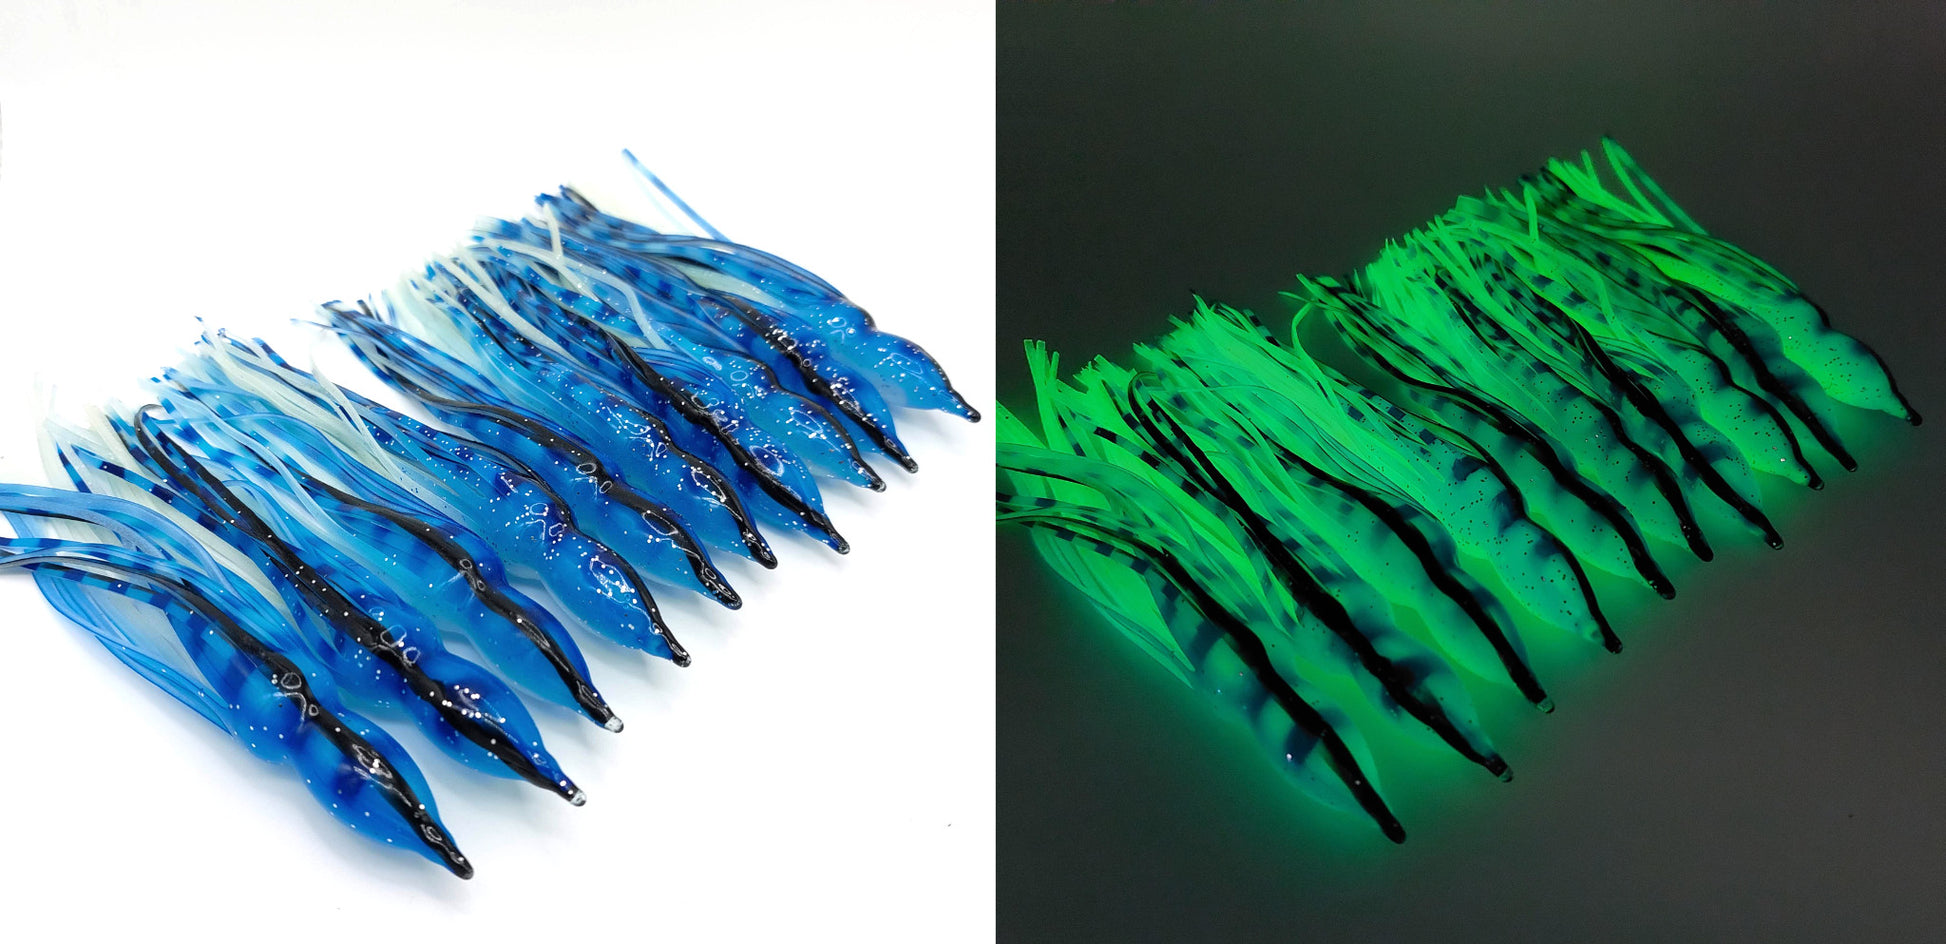 10 PC 6" Squid Skirts - Evolution Lures